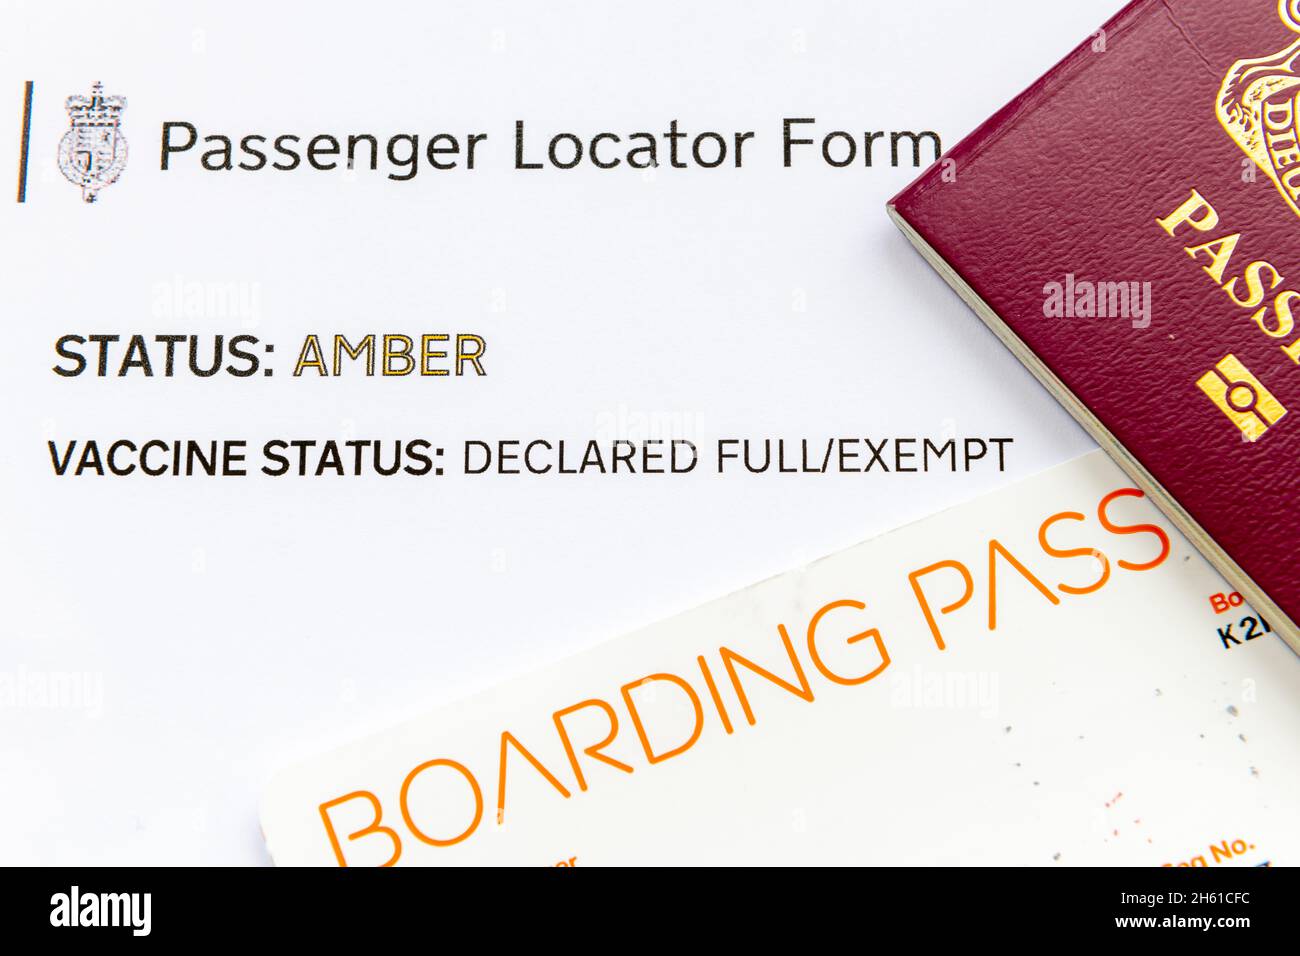 Passport, boarding pass and passenger locator form. Some of the documents required for international travel during Covid-19 pandemic. Stock Photo